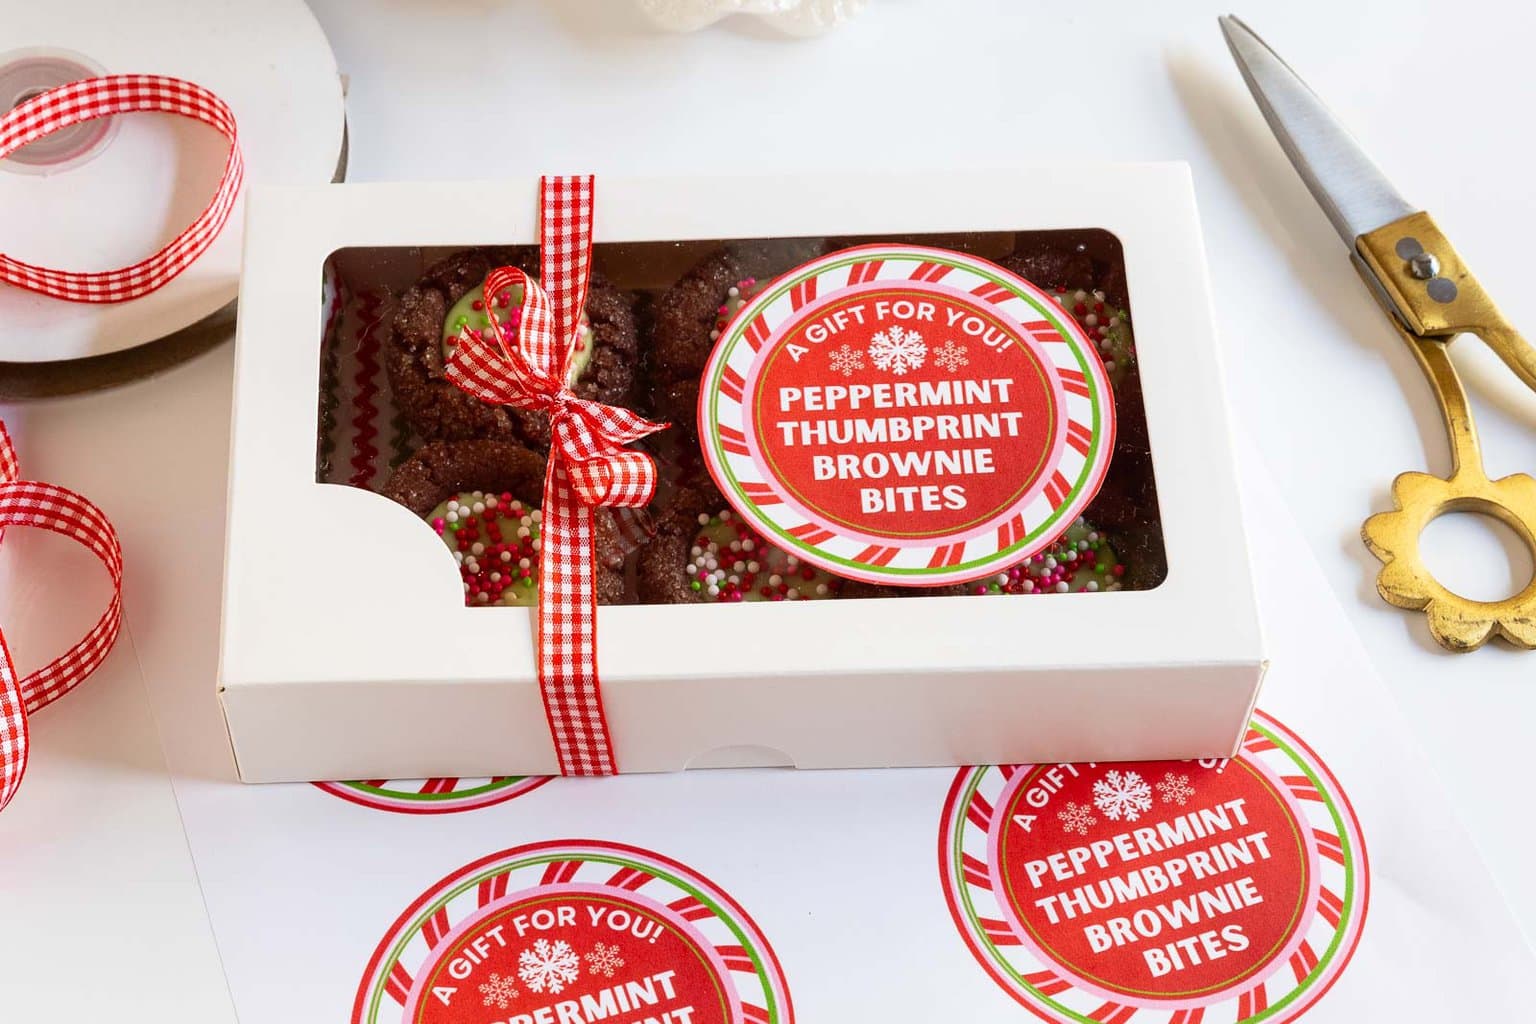 Horizontal photo of a windowed gift box filled with Peppermint Thumbprint Brownie Bites with a custom label for gift giving on the top of the box.